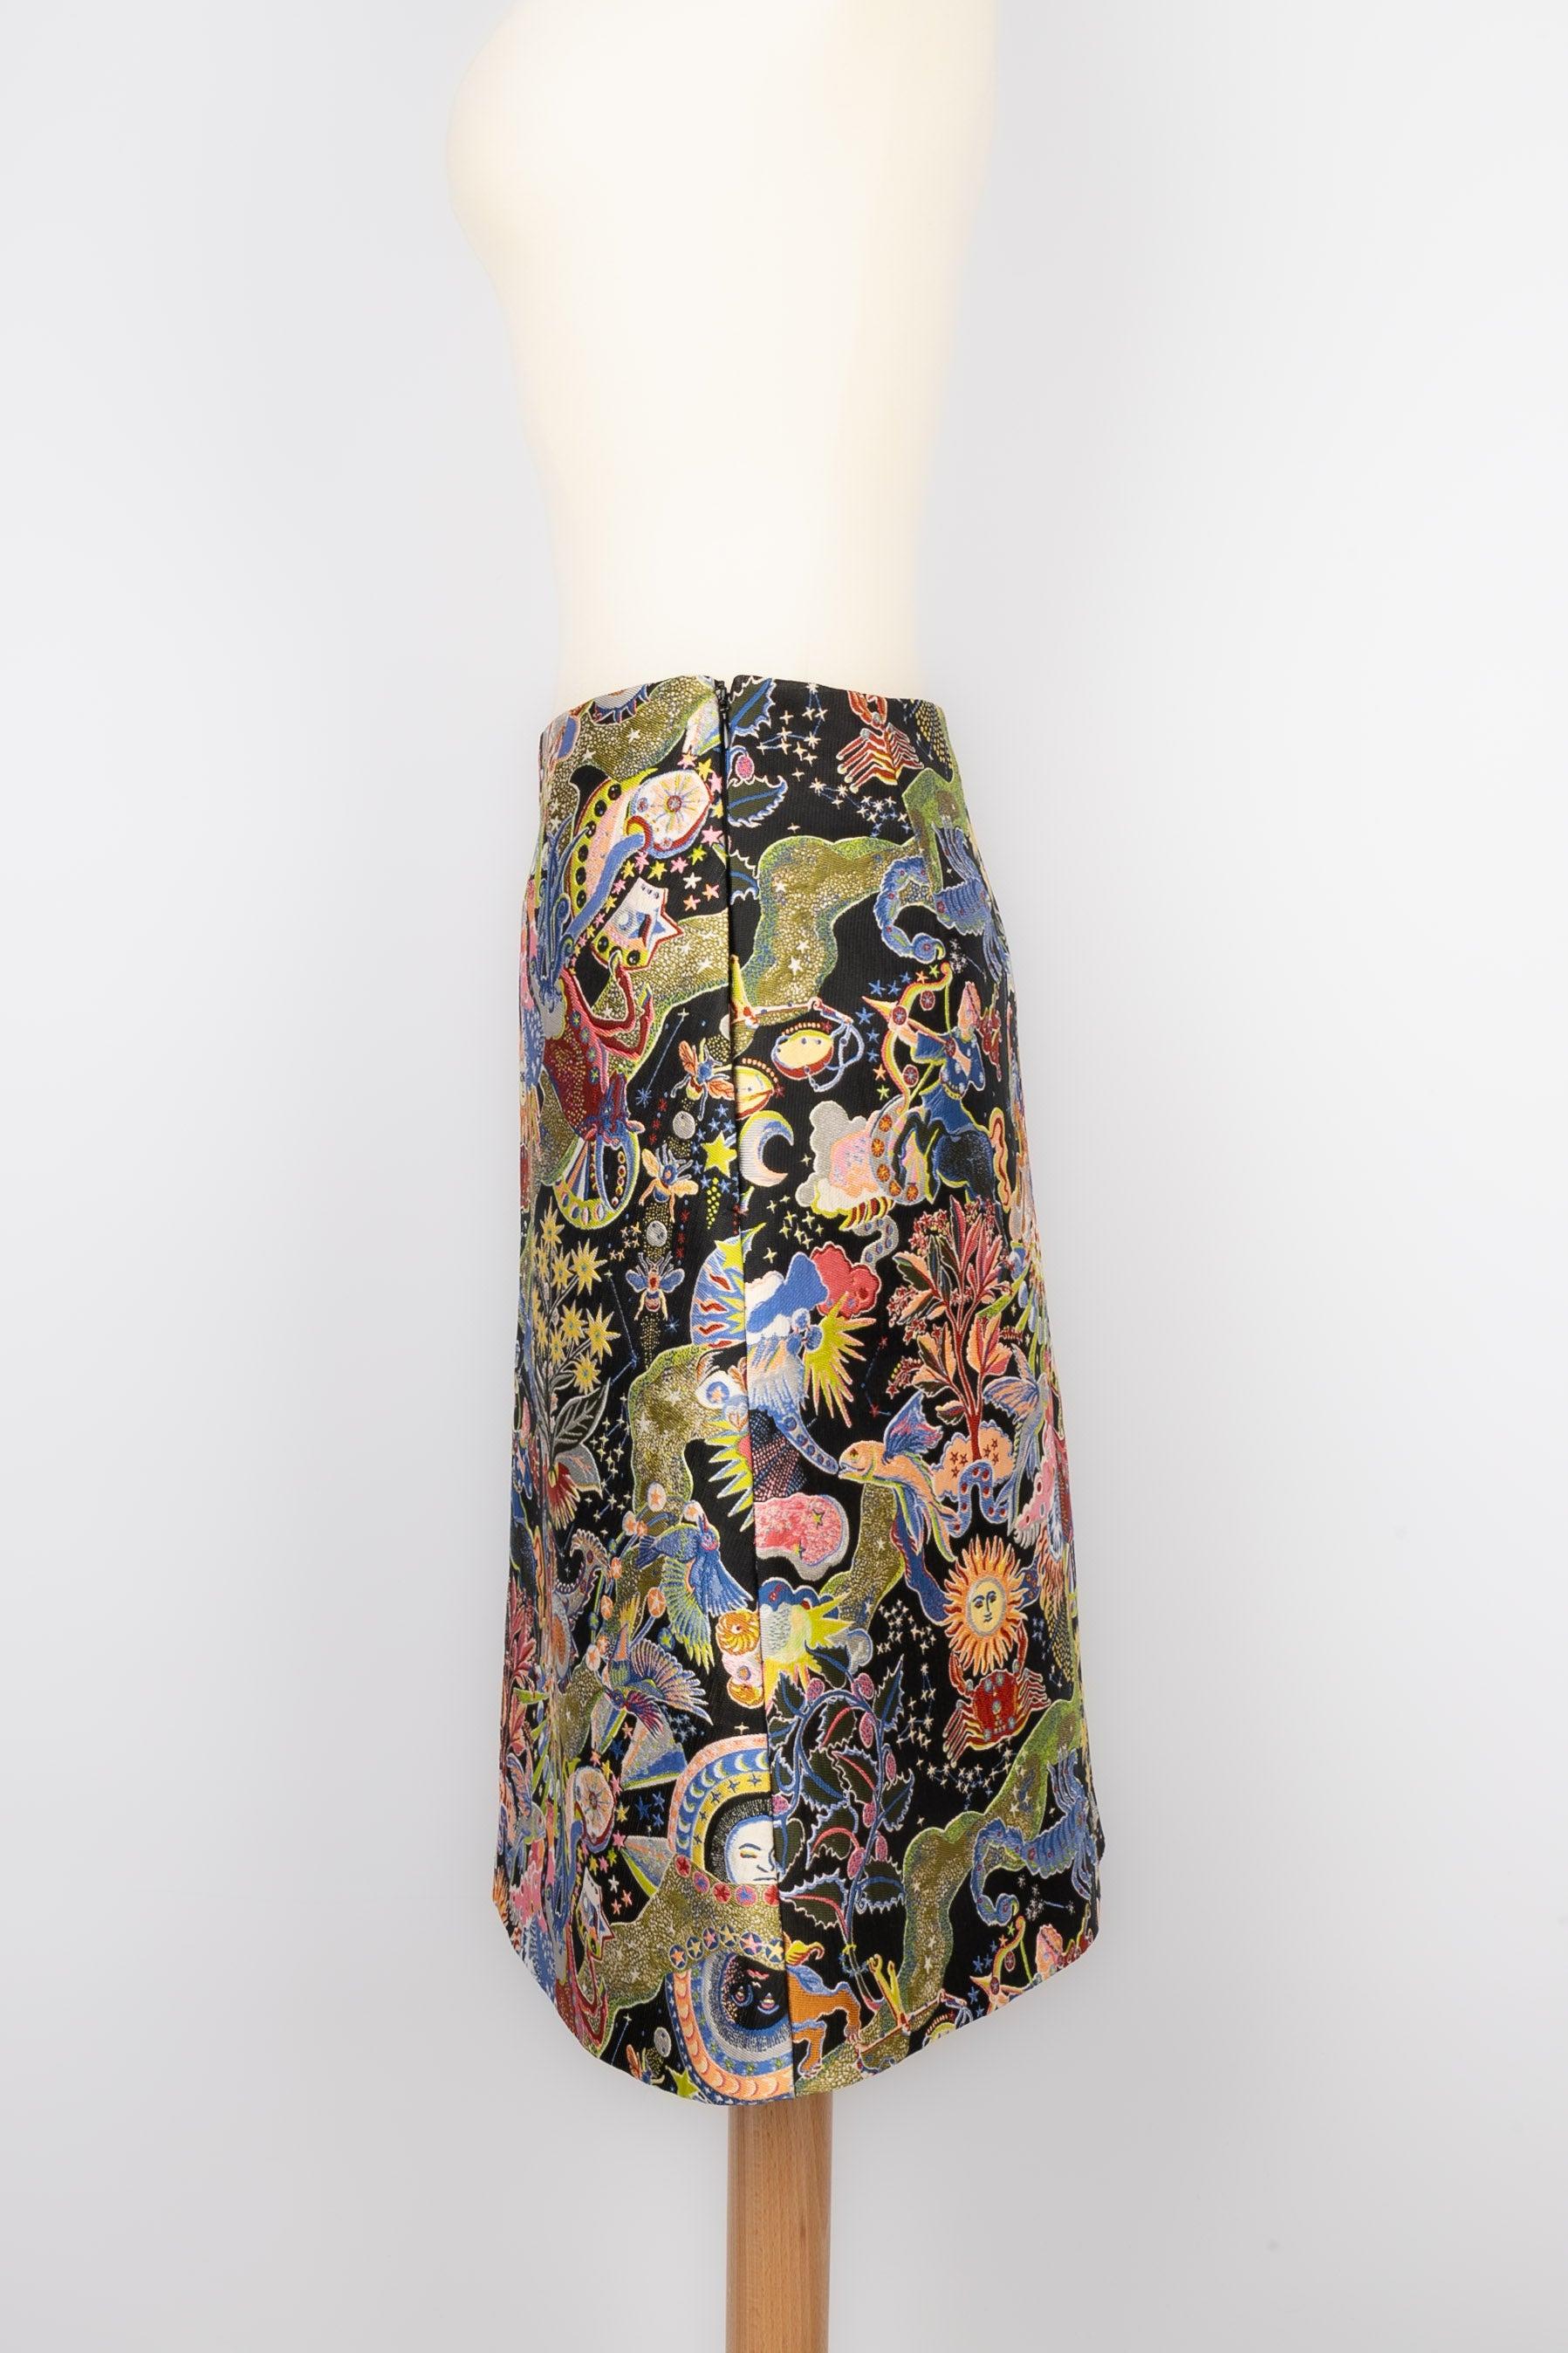 Dior - Embroidered fabric skirt with a silk lining. No size nor composition label, it fits a 38FR.

Additional information:
Condition: Very good condition
Dimensions: Waist: 34 cm - Length: 54 cm

Seller Reference: FJ76
